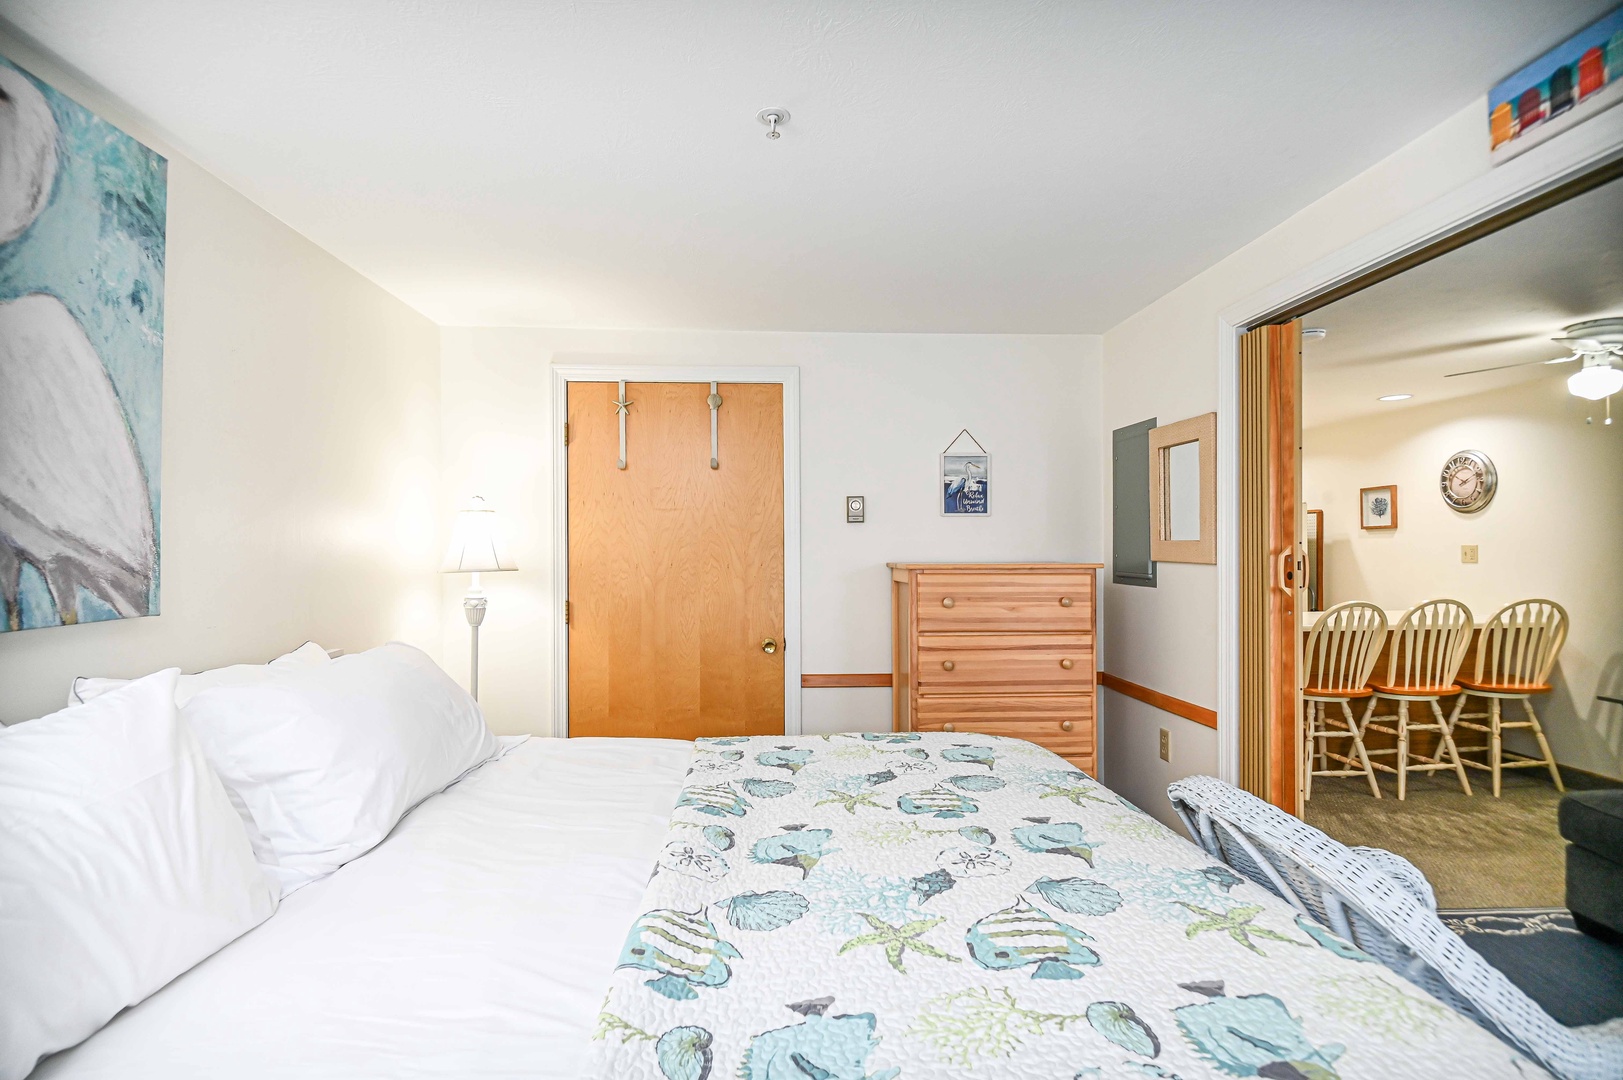 The spacious, coastal bedroom features a plush king-sized bed